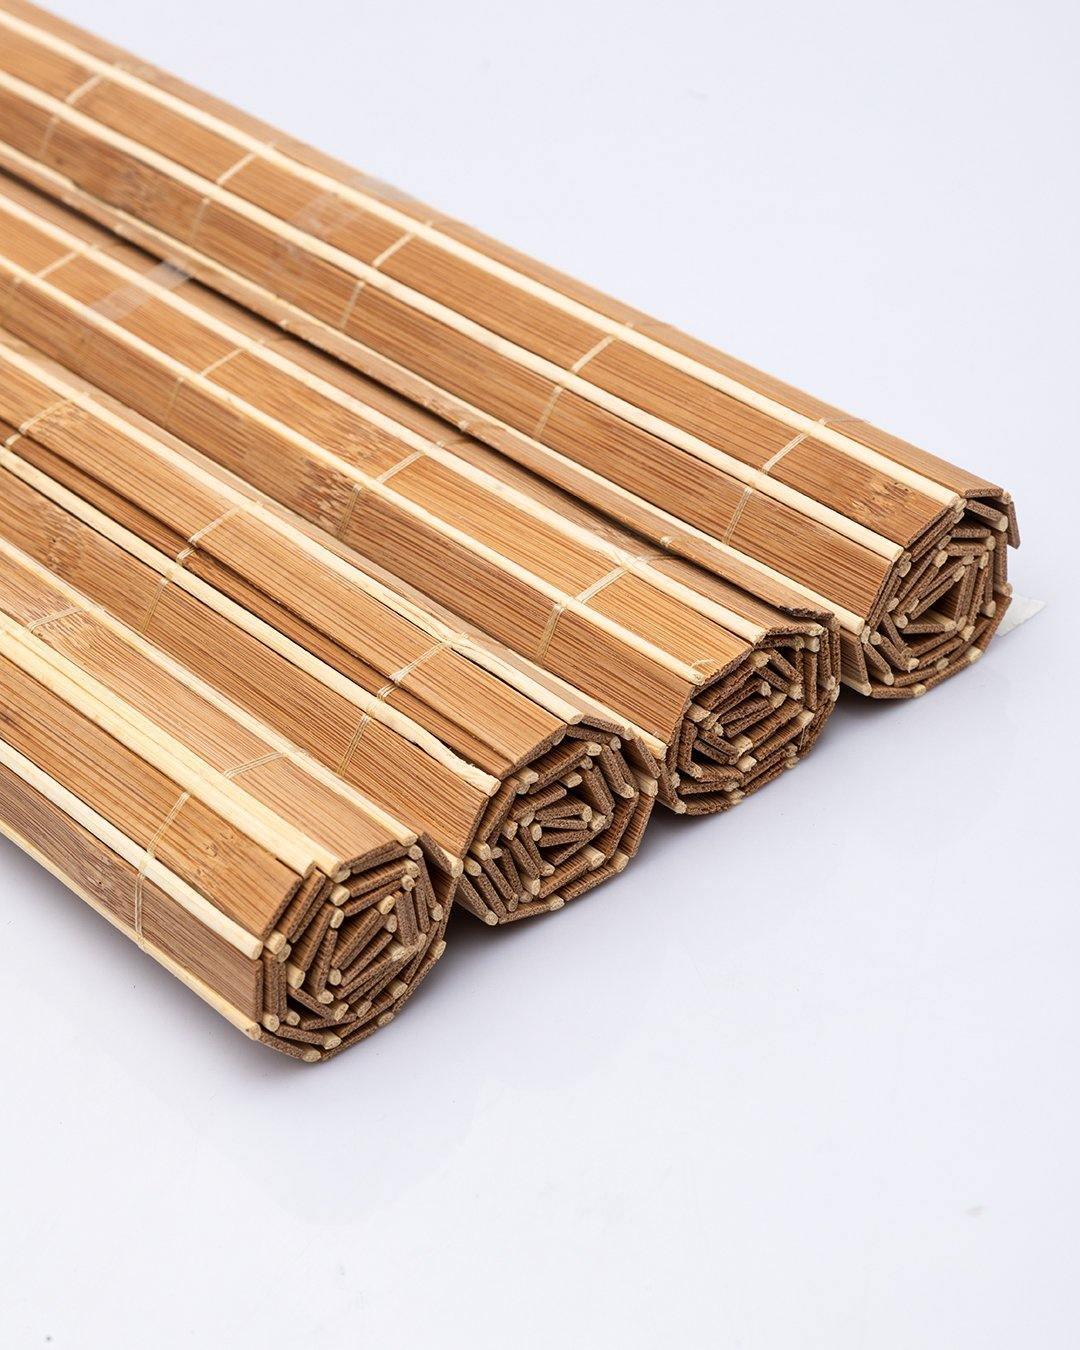 Bamboo Placemats, for Dining Table, Camel Colour, Wood, Set of 4 - MARKET 99